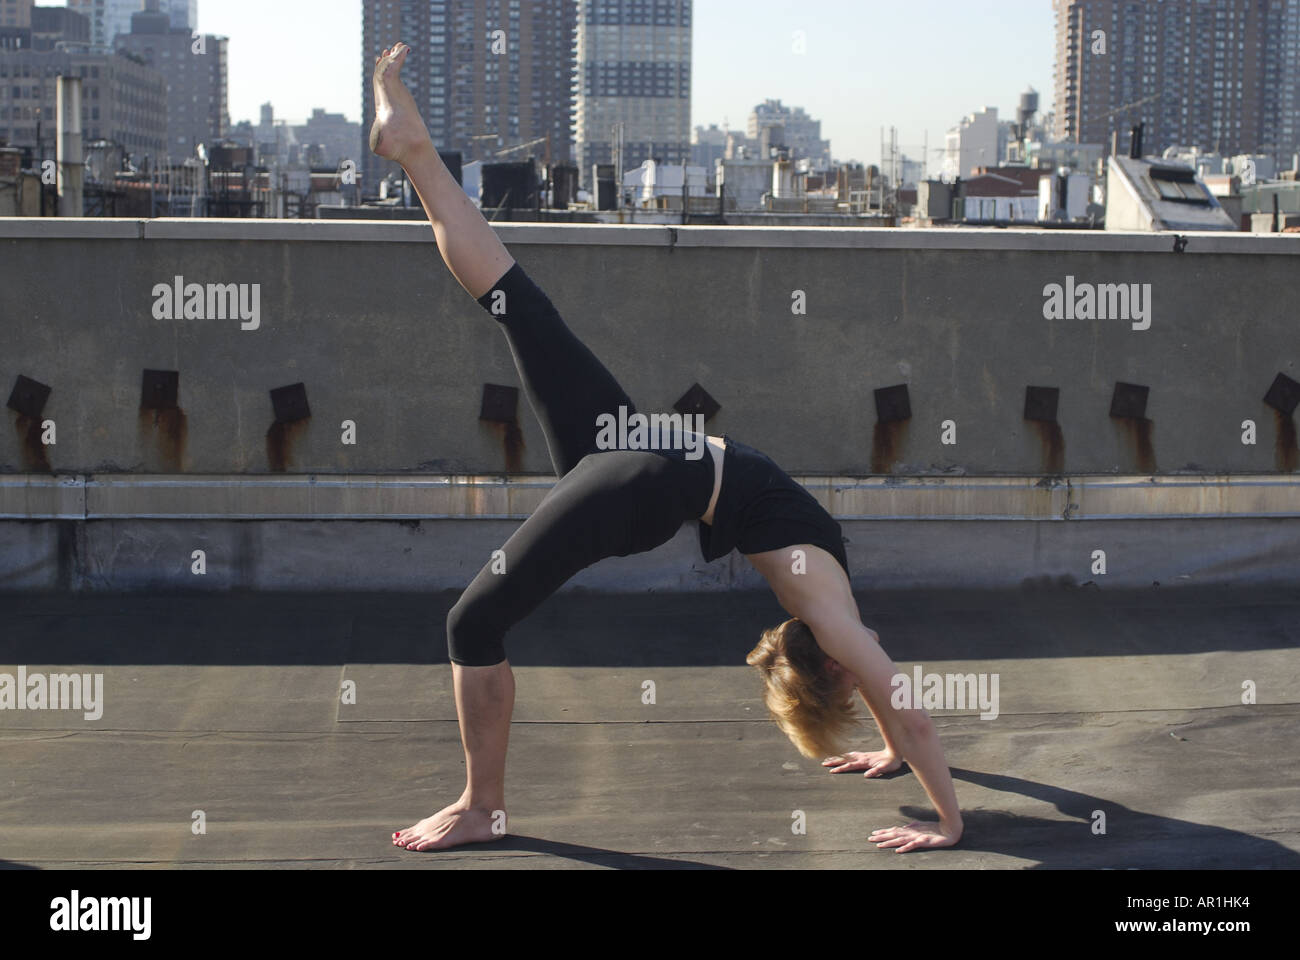 Model released New York CIty Thirty years old blond woman practising yoga in a sunny morning in mid town Manhattan exercise heal Stock Photo